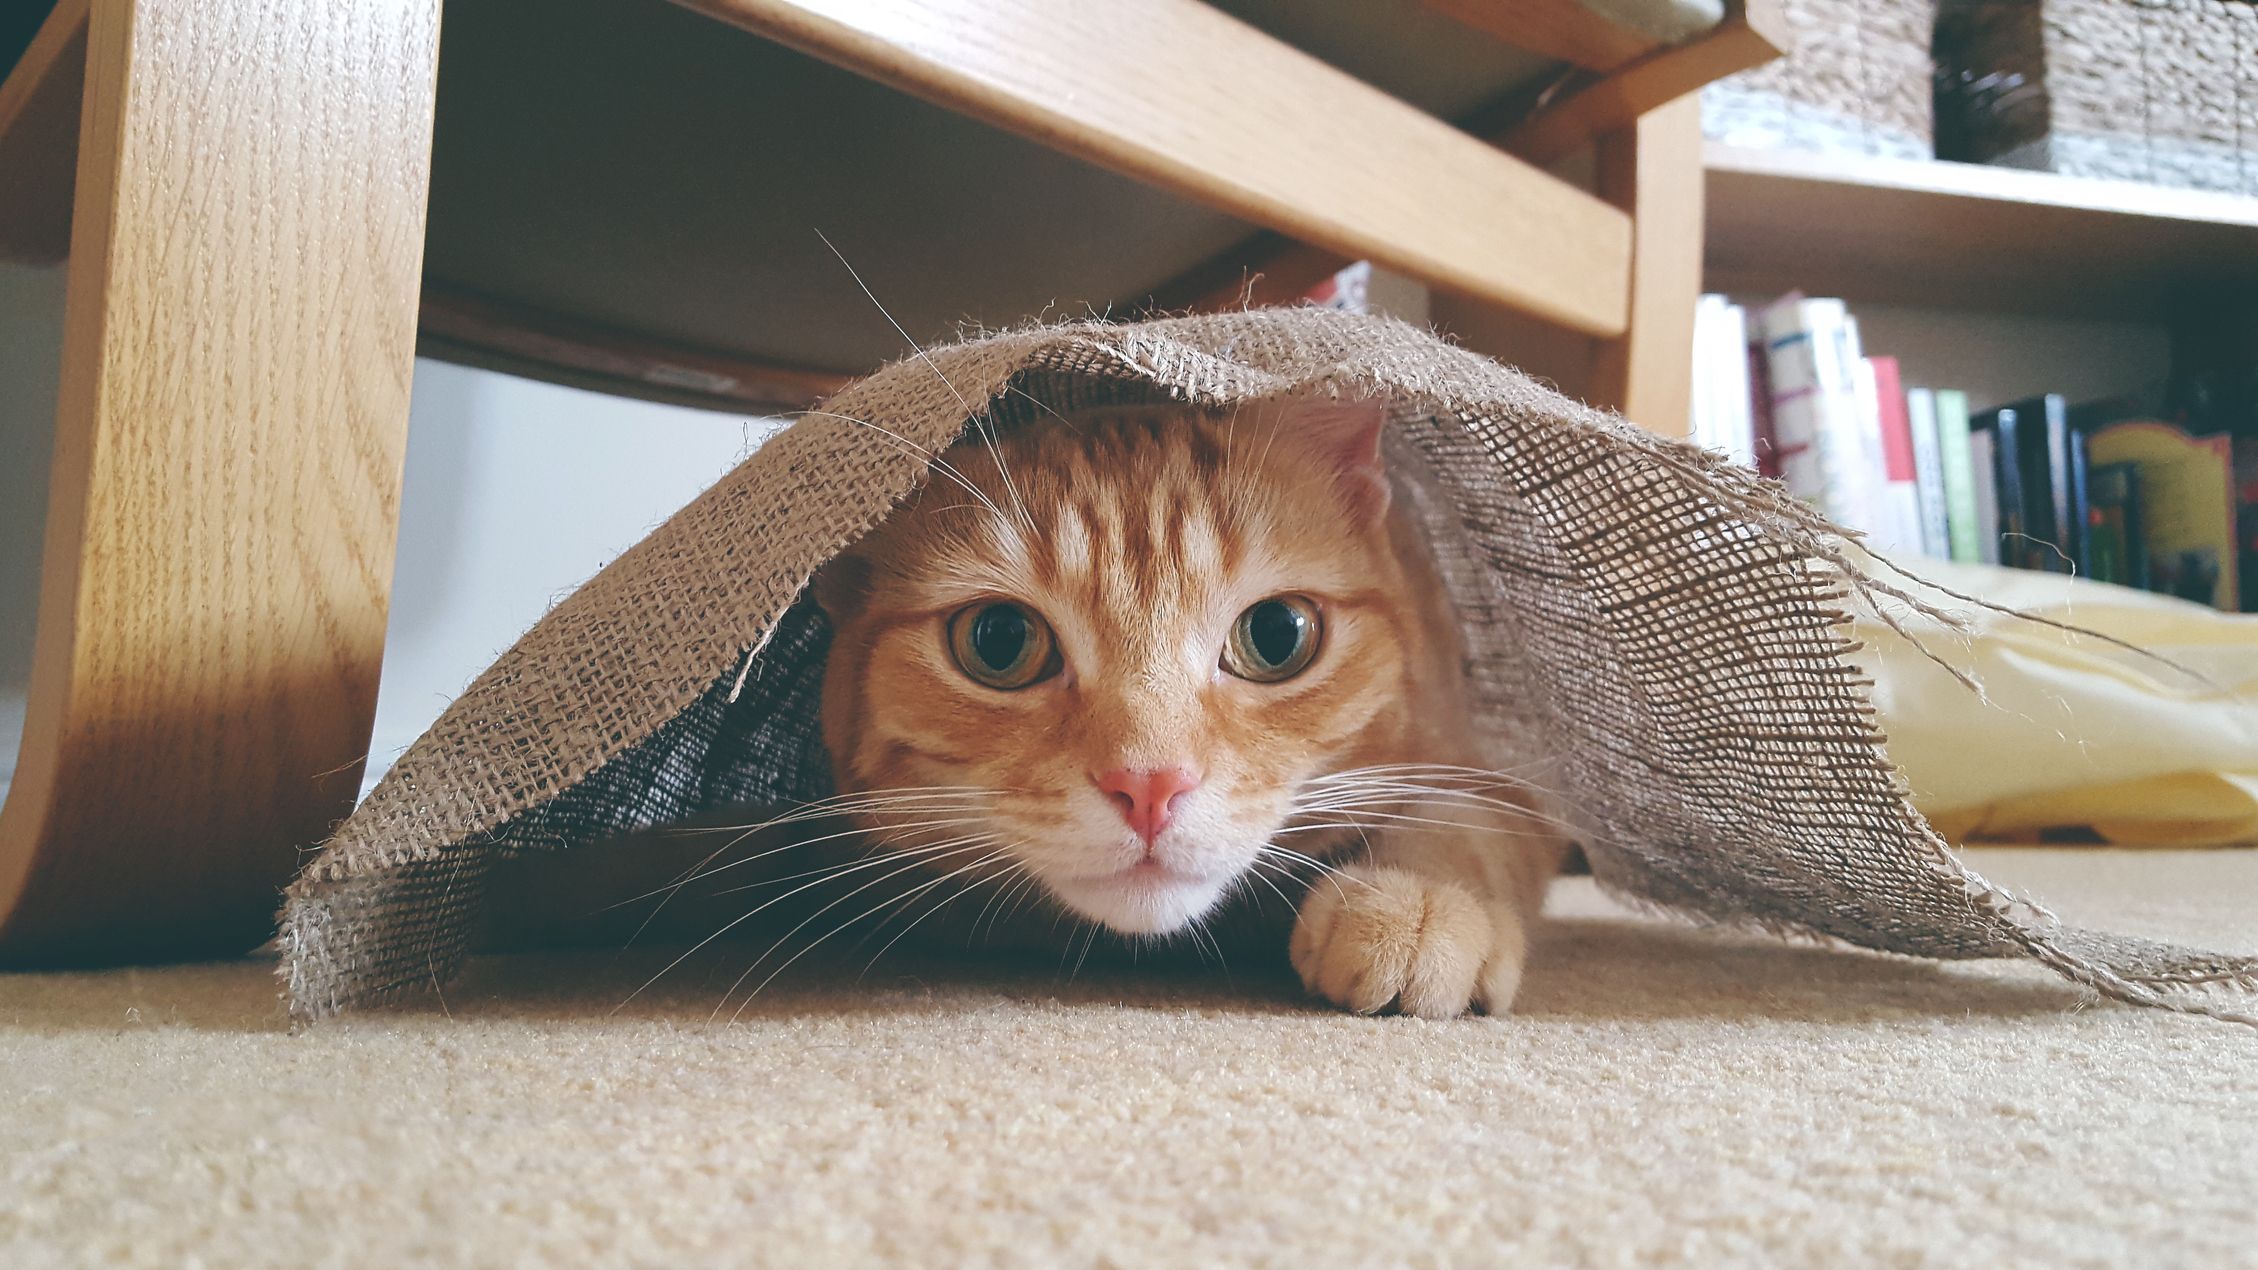 62 Best Cat Instagram Captions for Cute, Funny Posts